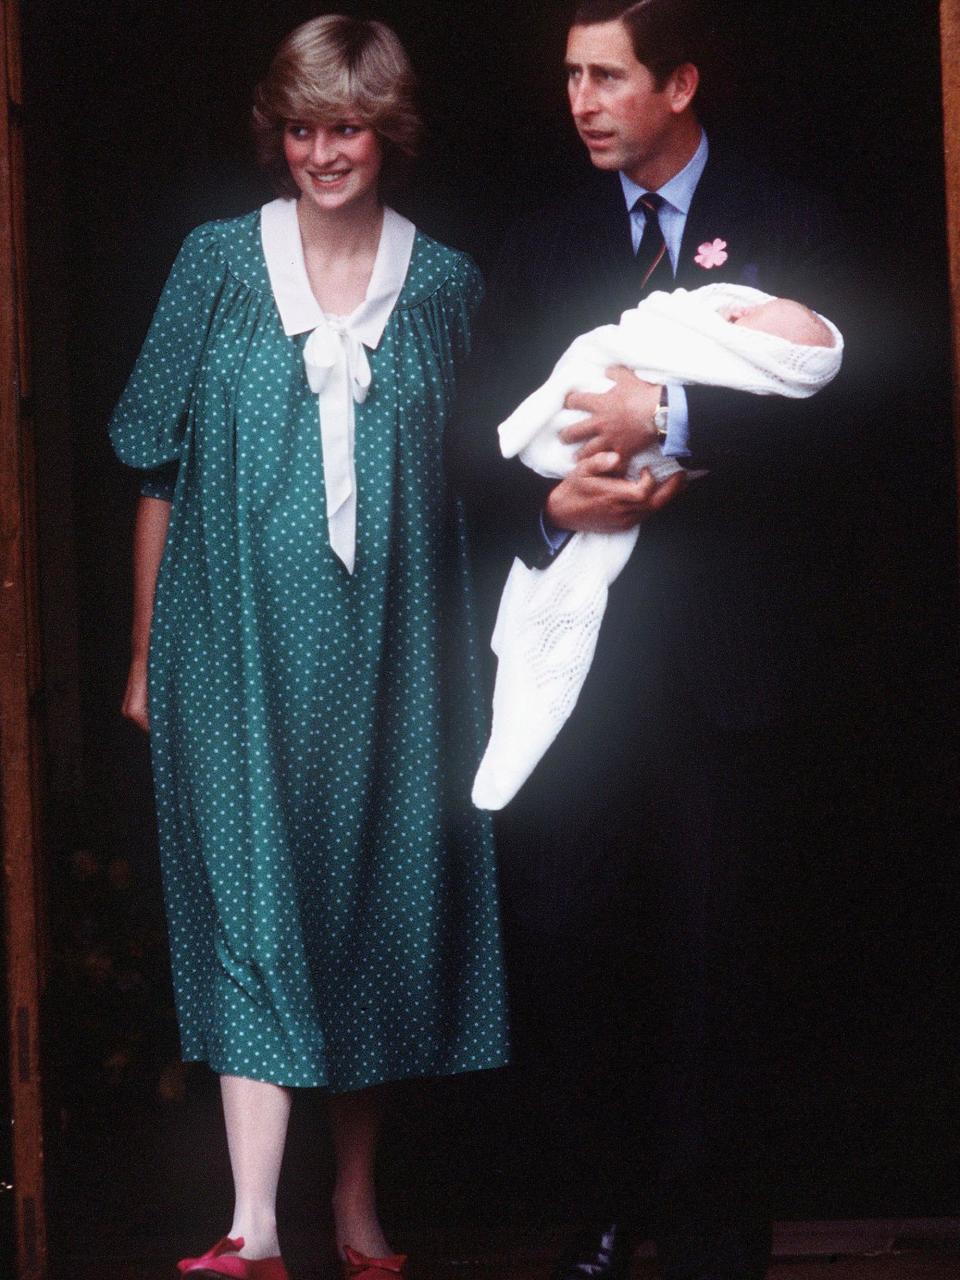 June 21, 1982: Prince William is born a month before the couple's first anniversary and Charles now has an heir.